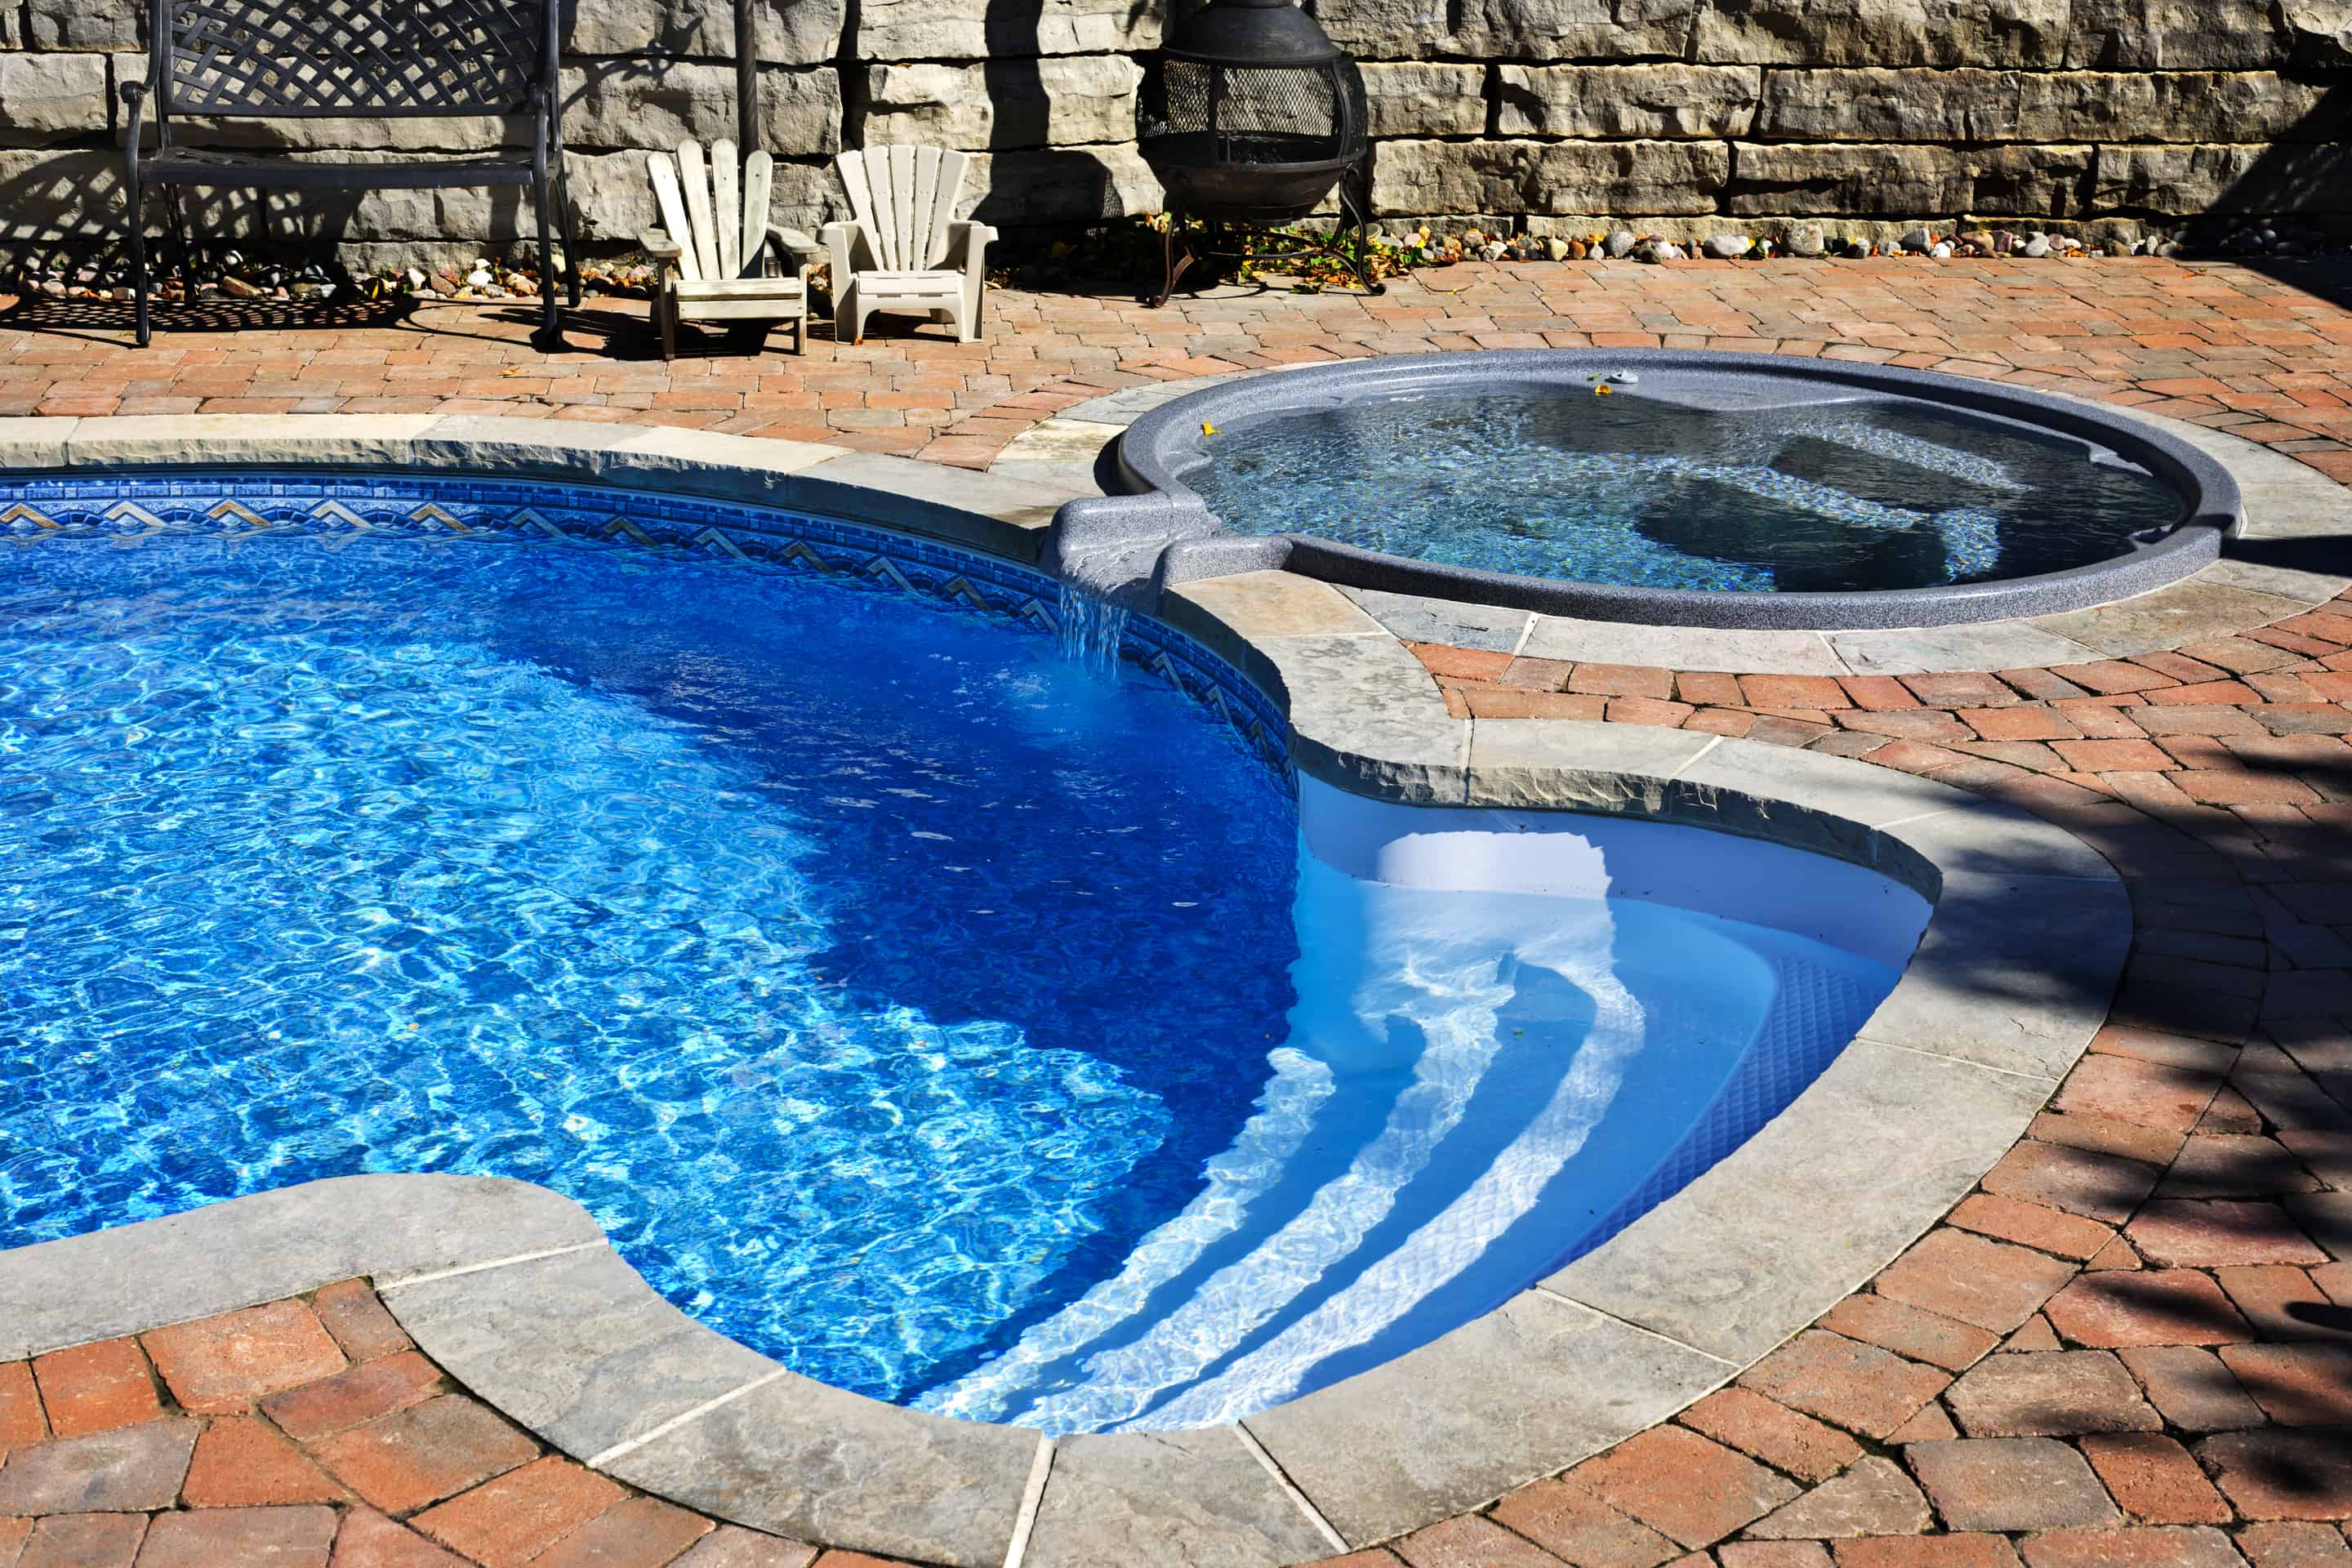 Pool Patio Stone Coping Sealing, Should You Seal Pool Tile Grout